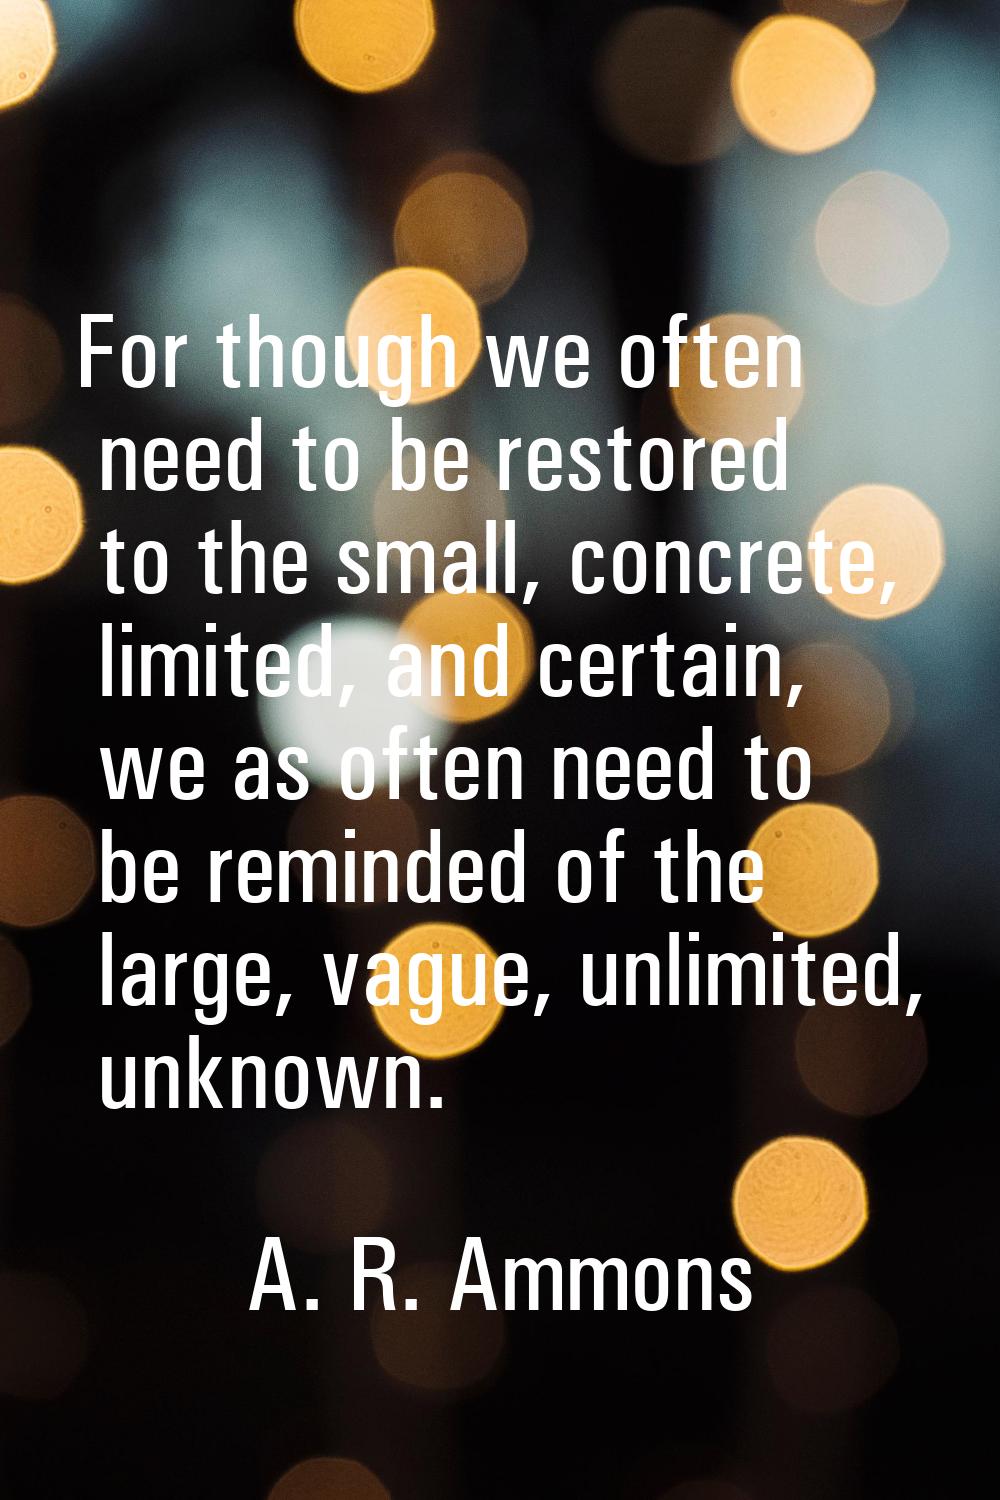 For though we often need to be restored to the small, concrete, limited, and certain, we as often n